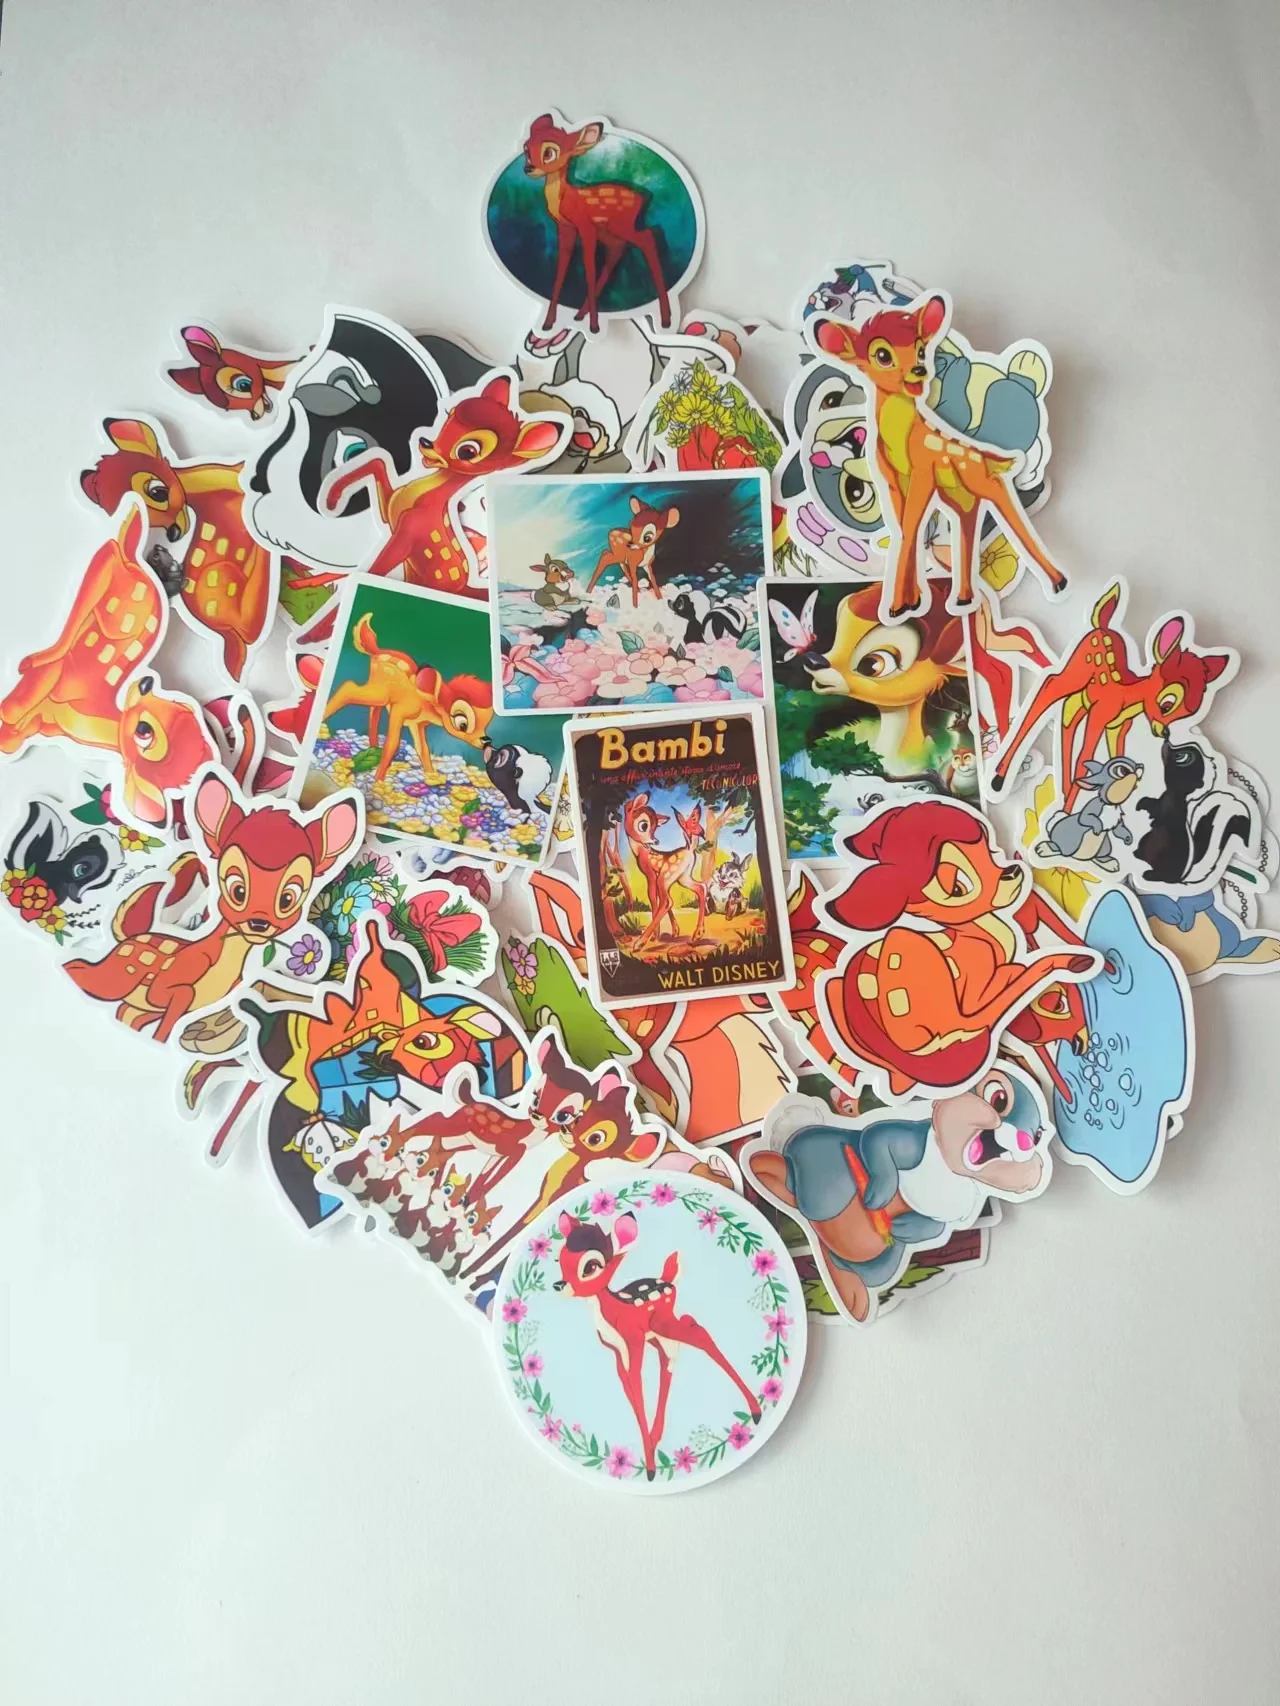 

50Pcs/Set Bambi fawn Stickers Doodle Ornament Automobile Stationery Waterproof DIY Personality Cartoon Sticker Reusable No glue